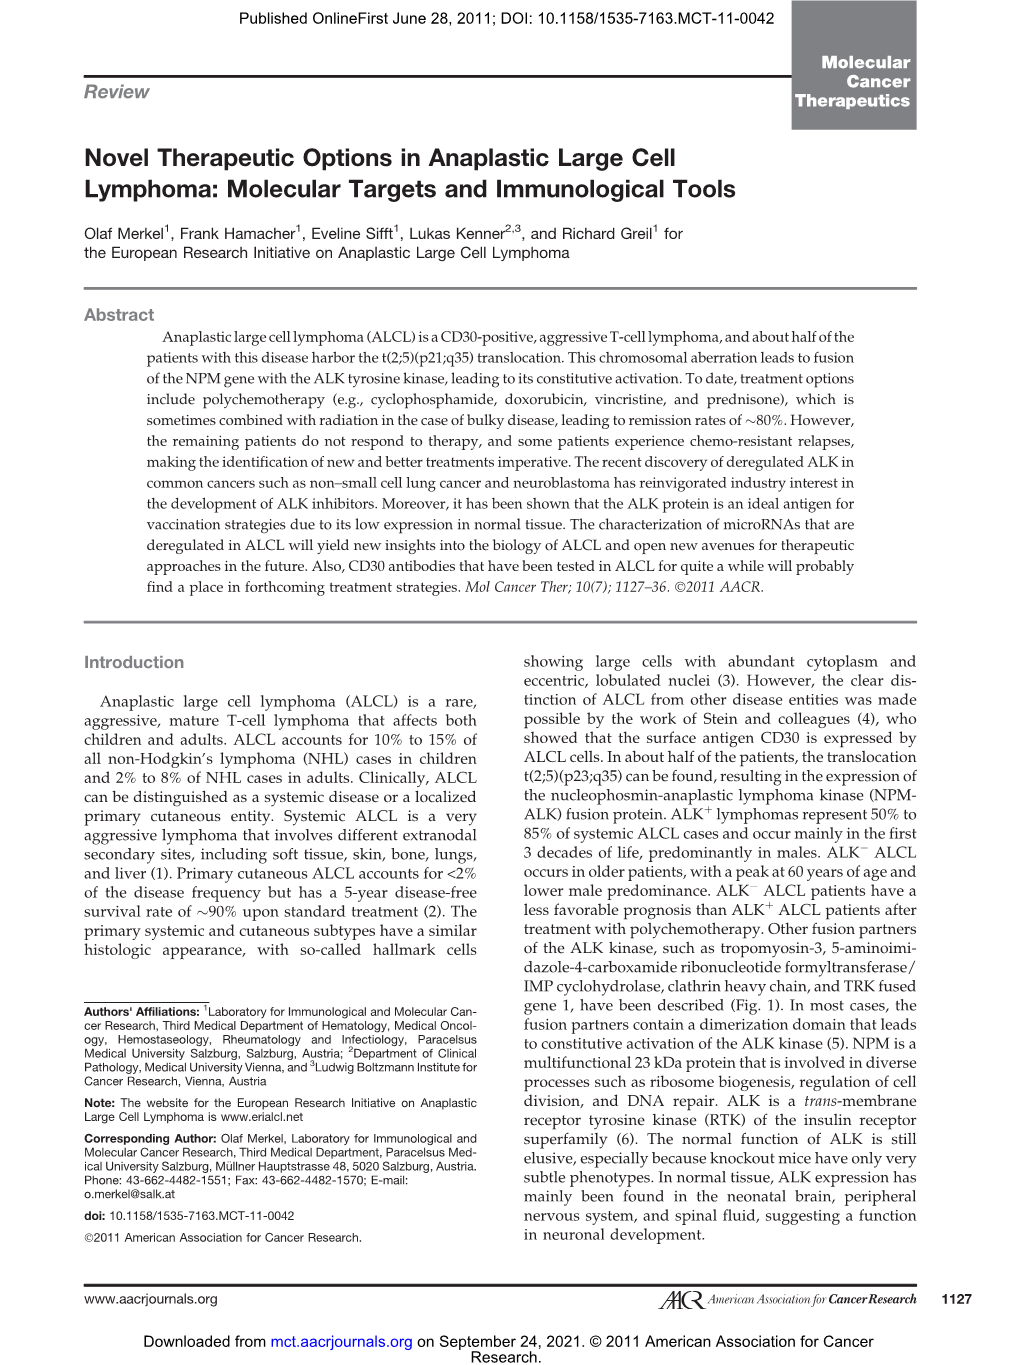 Novel Therapeutic Options in Anaplastic Large Cell Lymphoma: Molecular Targets and Immunological Tools